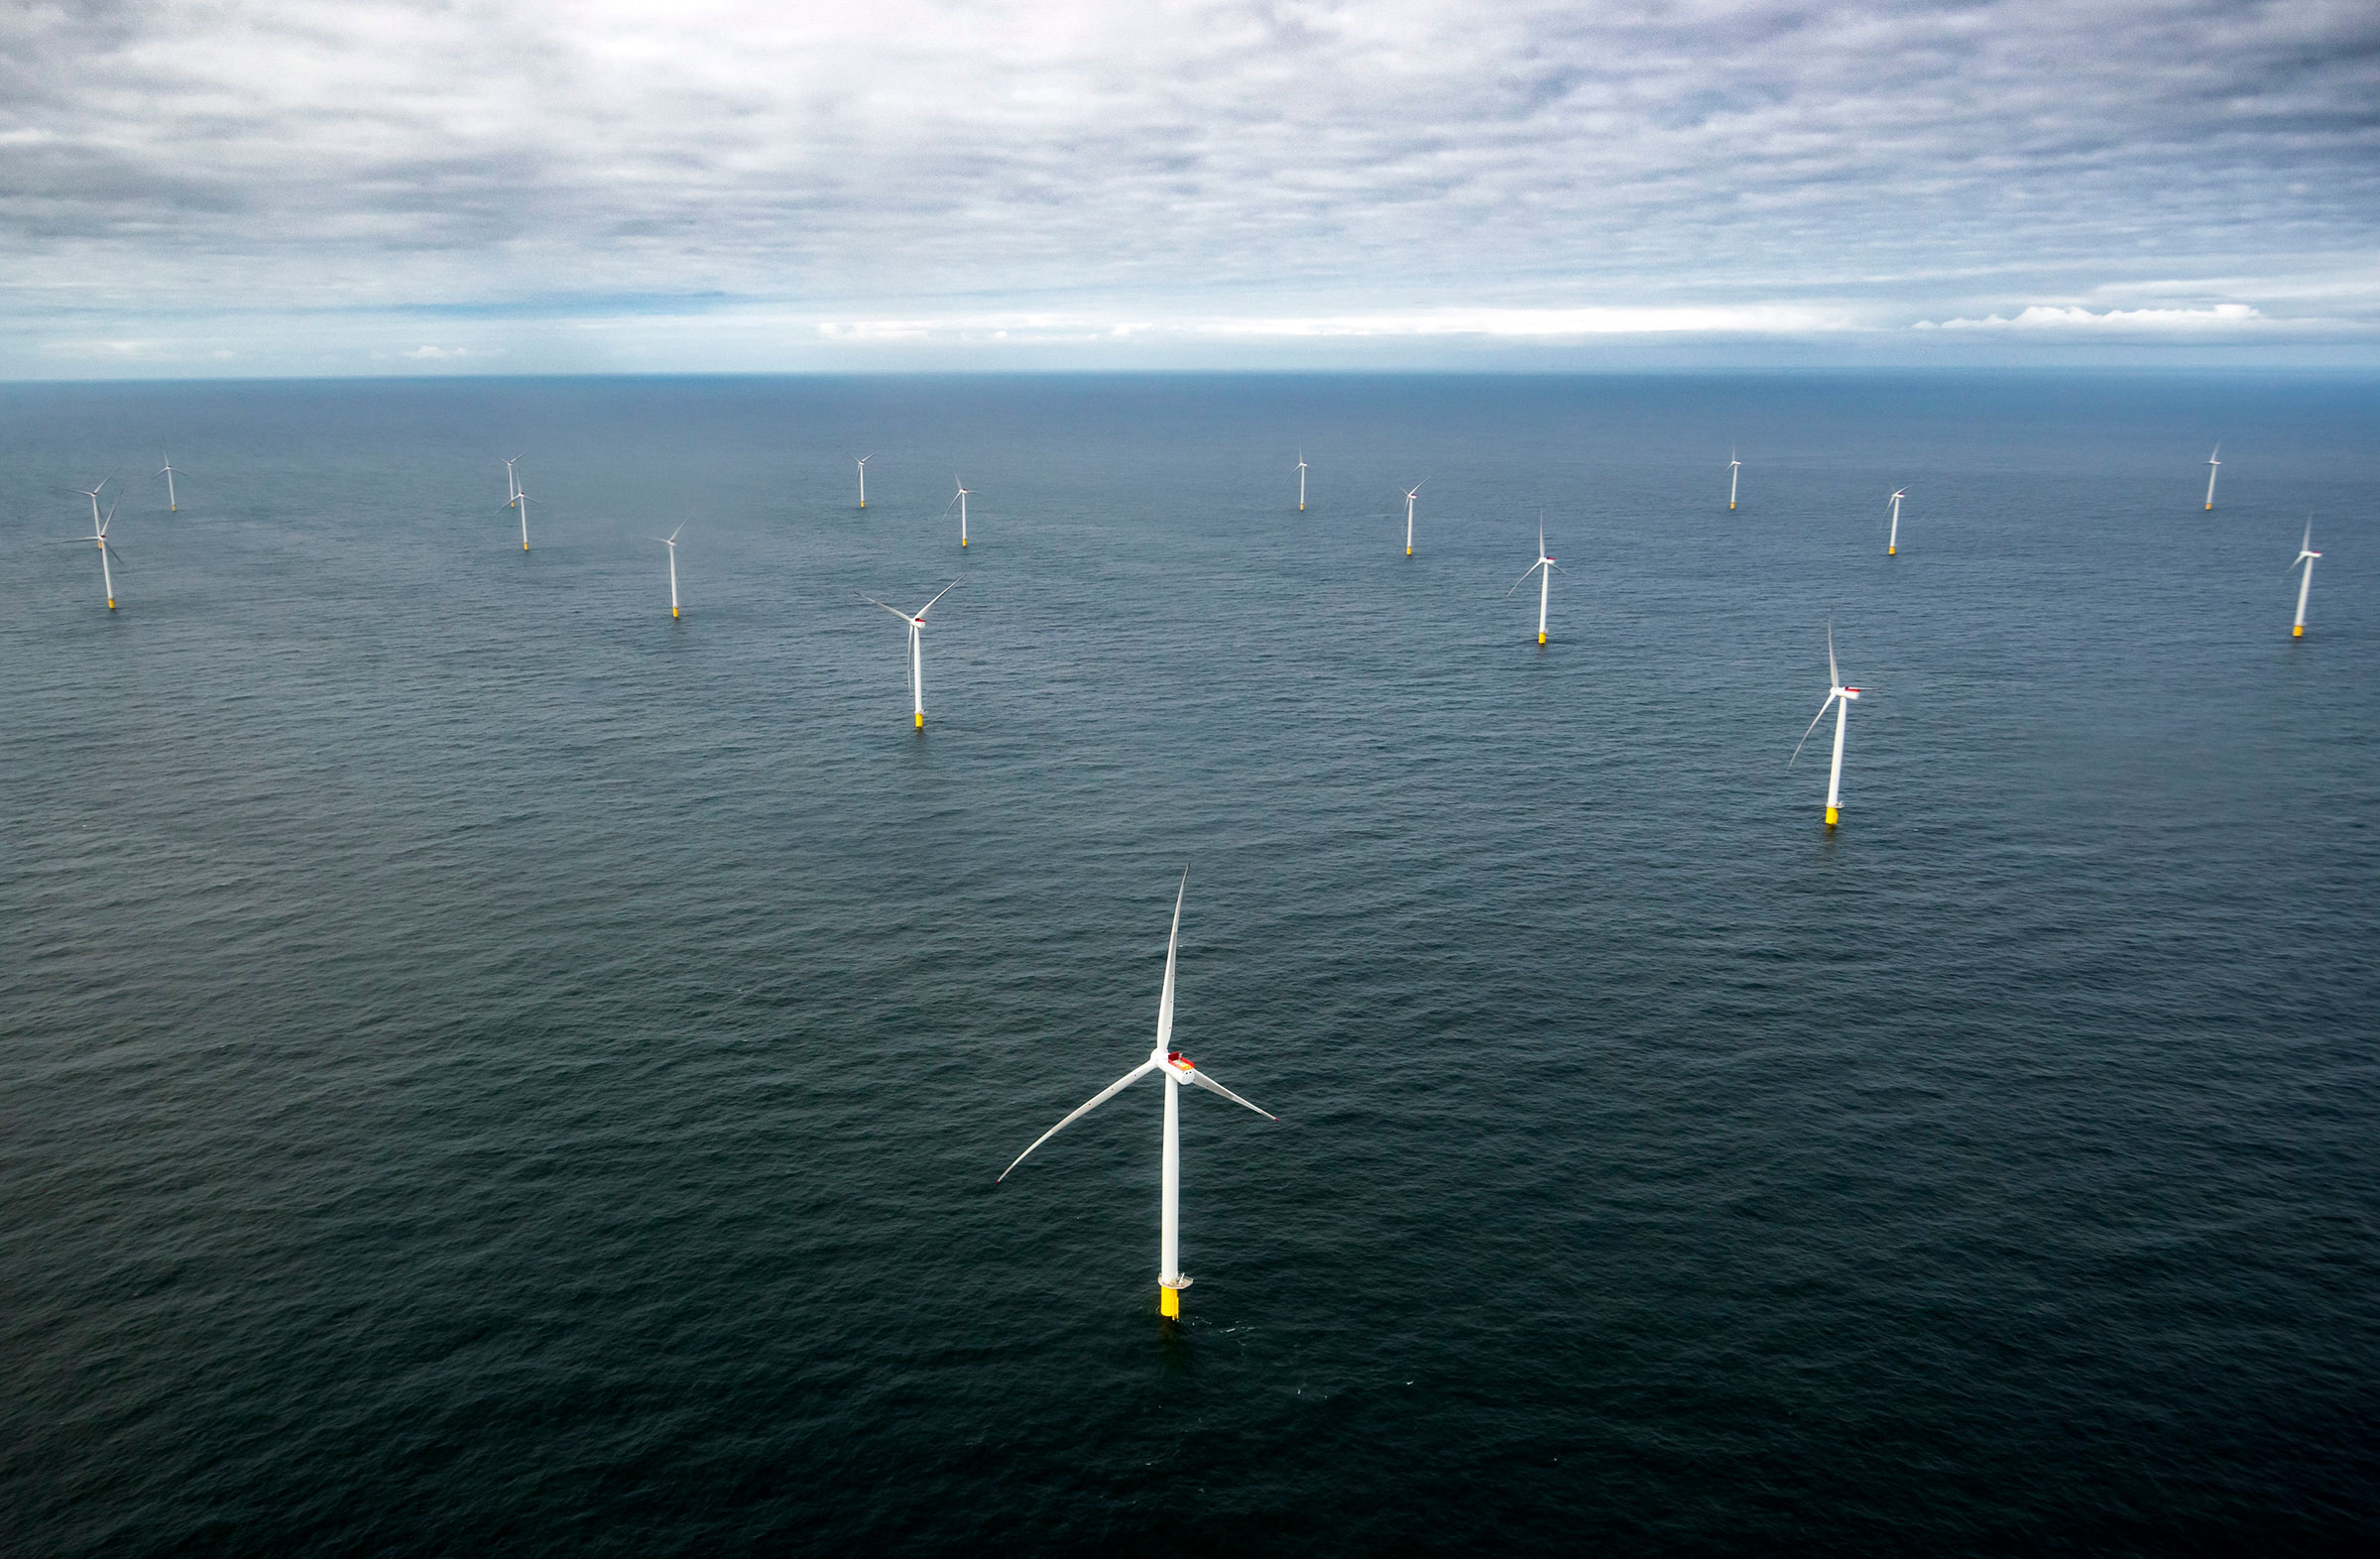 A view of the Race Bank wind farm off the English coast. (Danny Lawson—Press Association/AP)